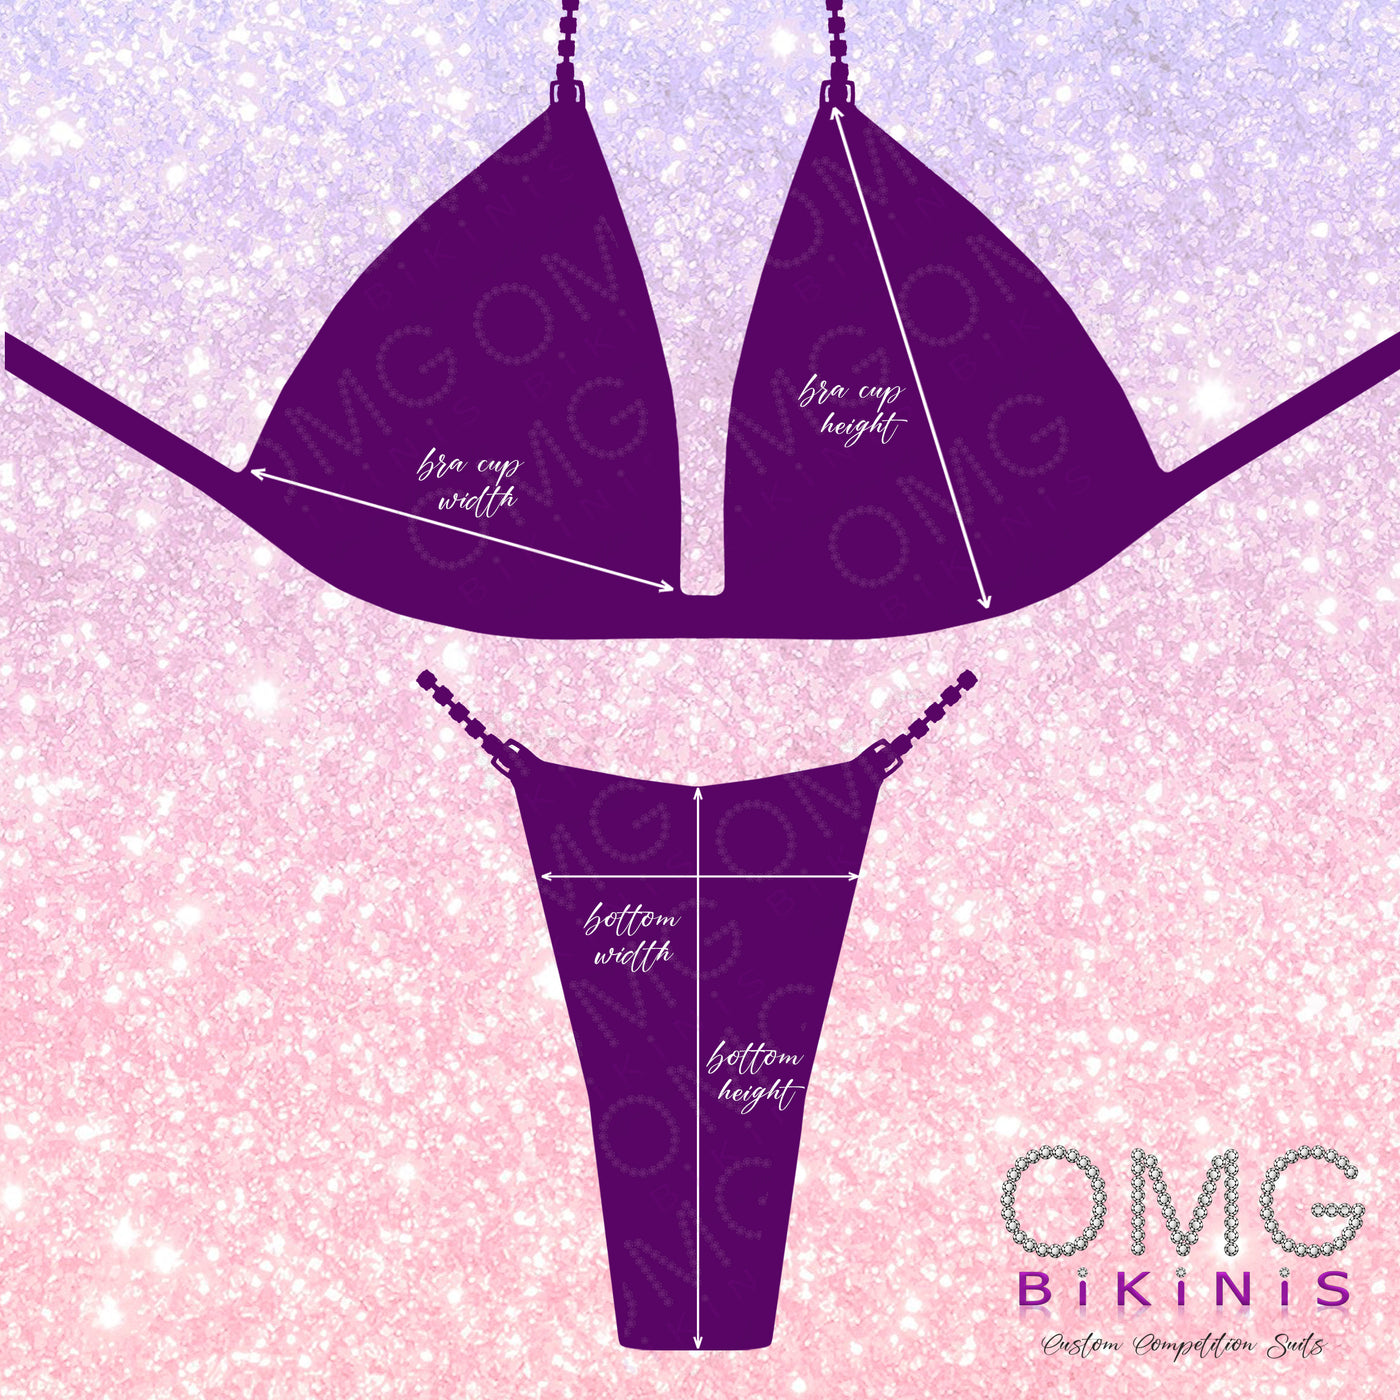 Perfection Competition Suit M/S | OMG Bikinis Rentals